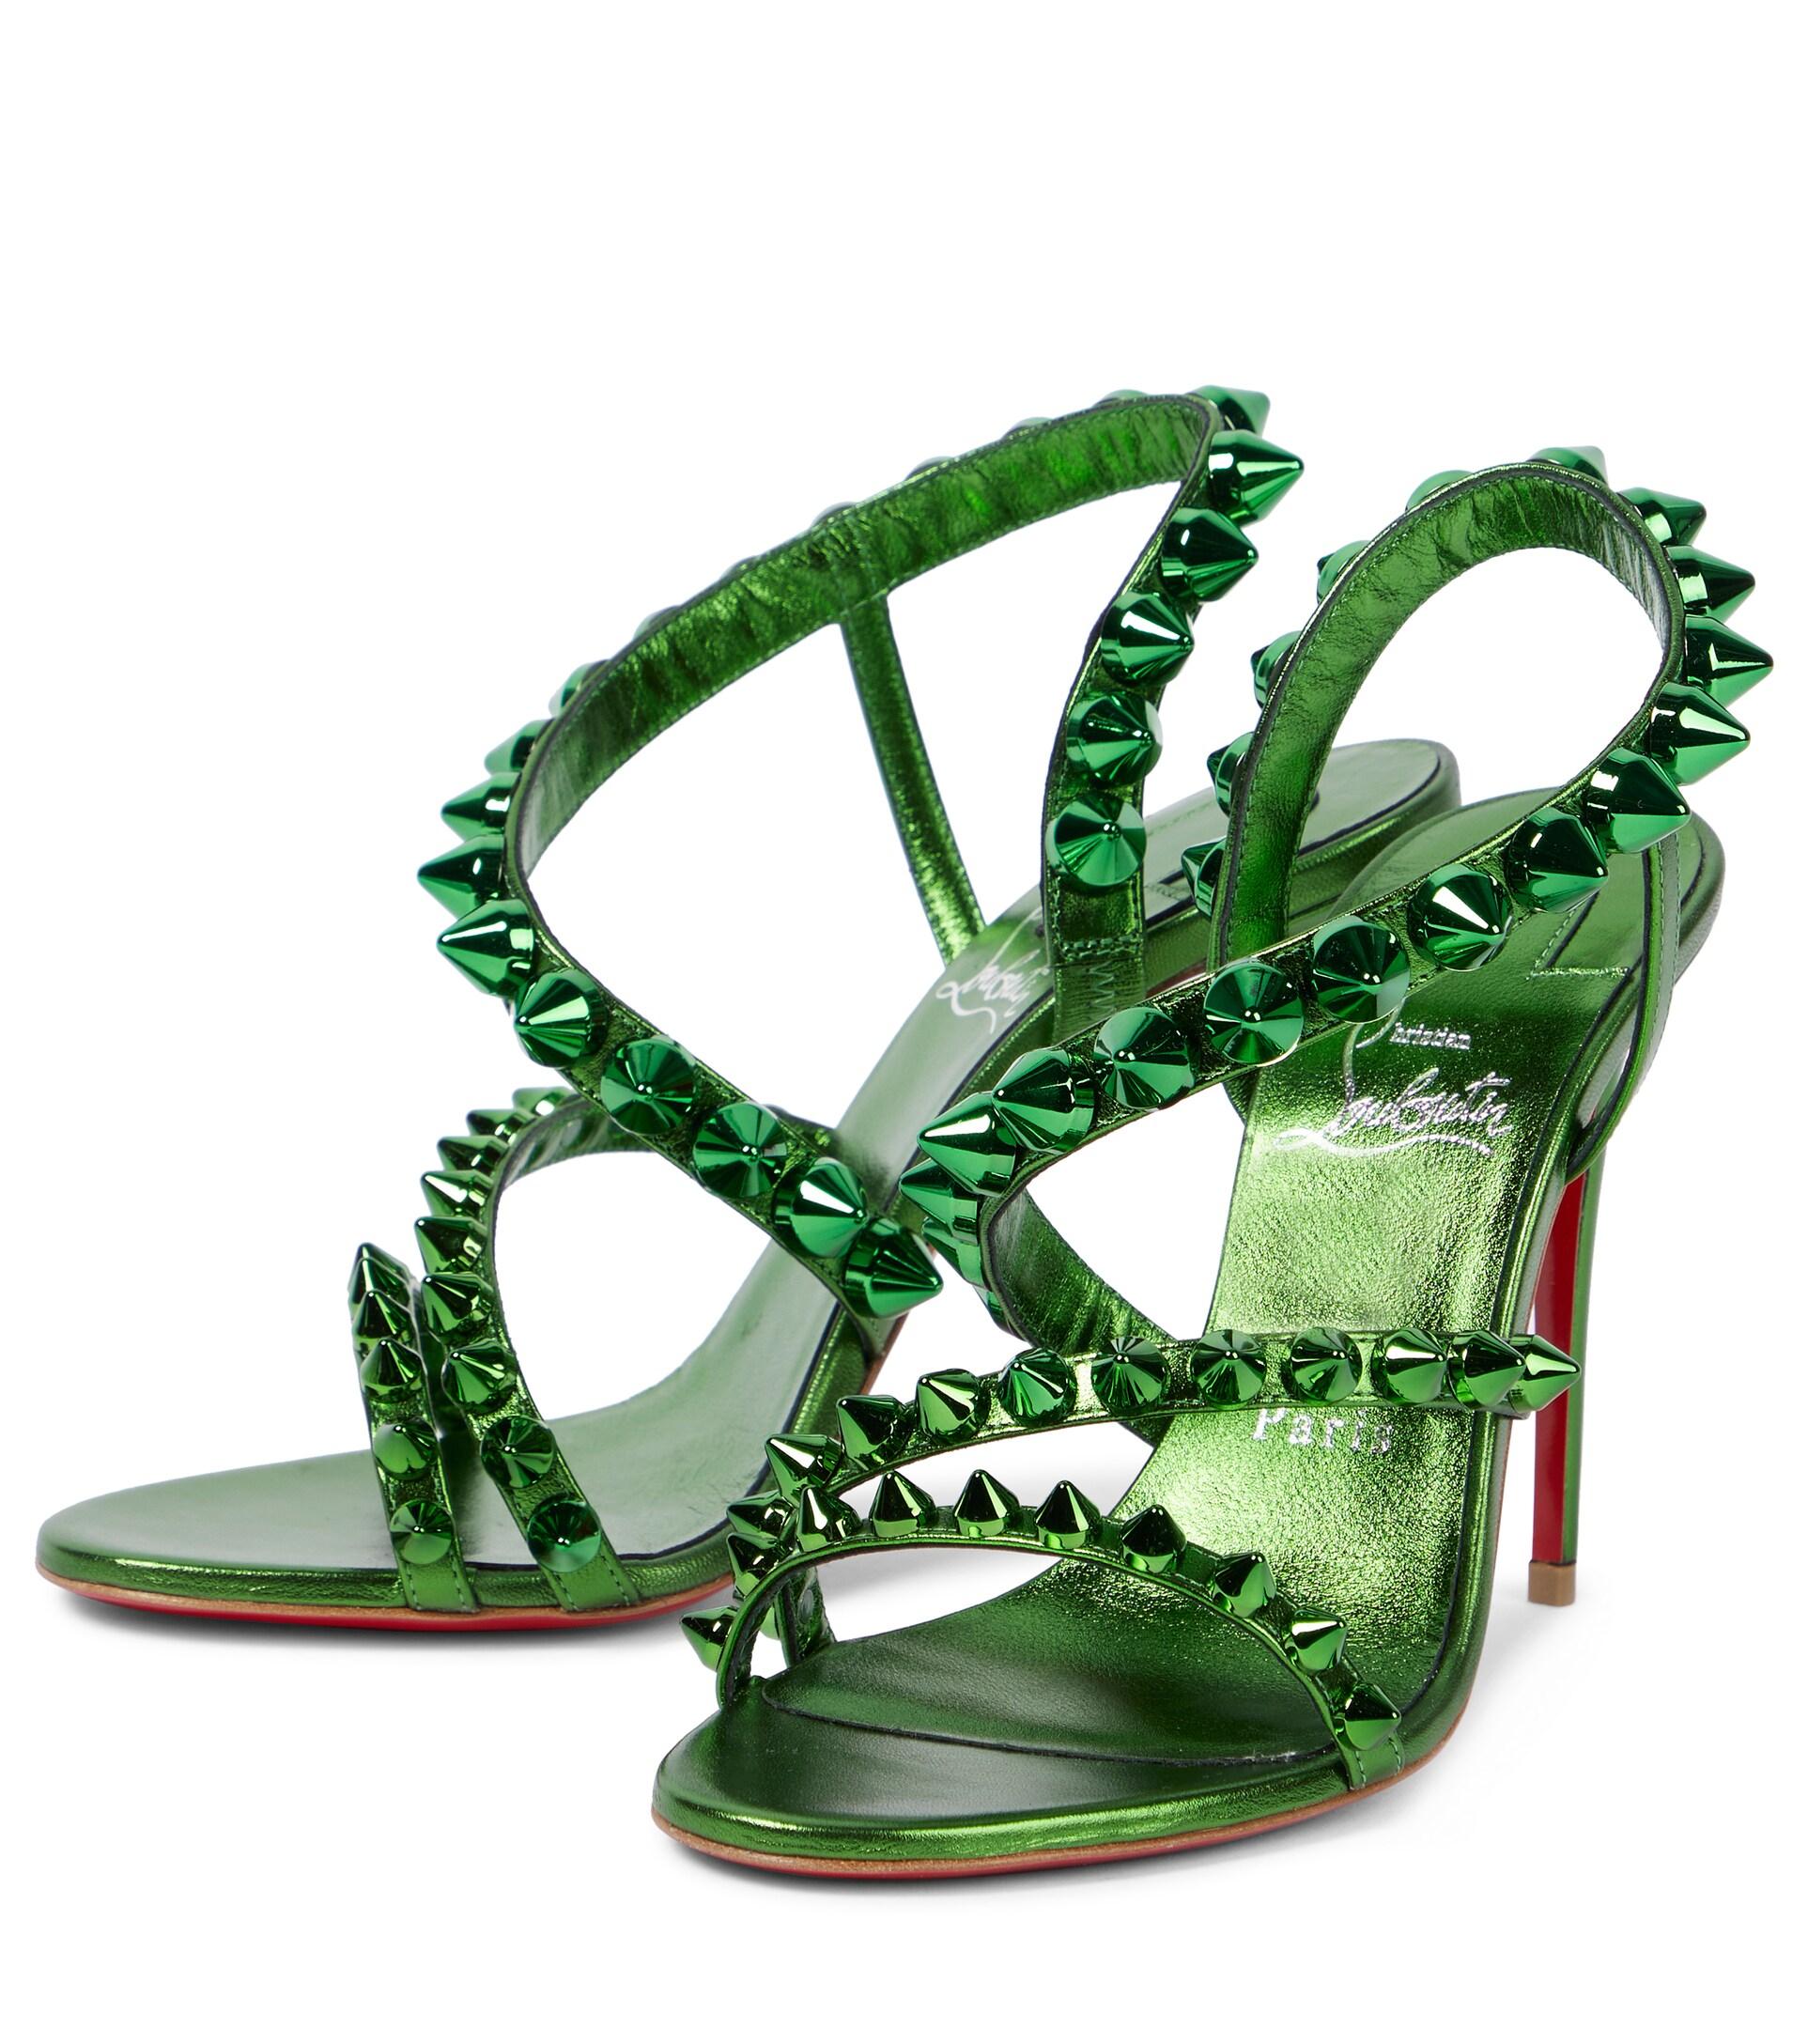 Christian Louboutin Spikita Strap 100 Leather Sandals in Green | Lyst